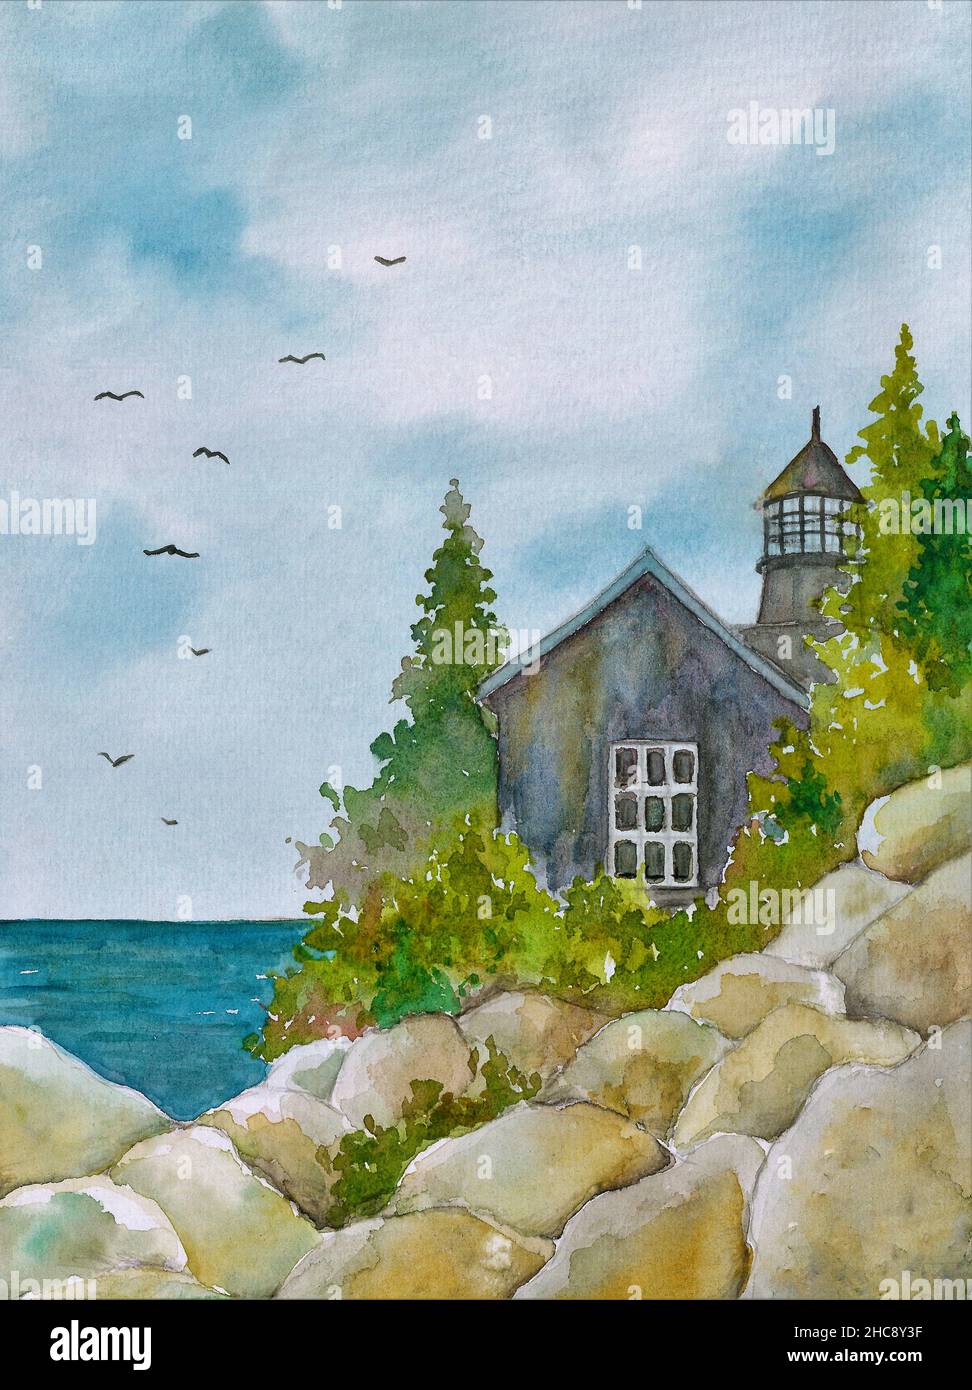 Watercolor painting. A house on the cliffs, a lighthouse and trees ...